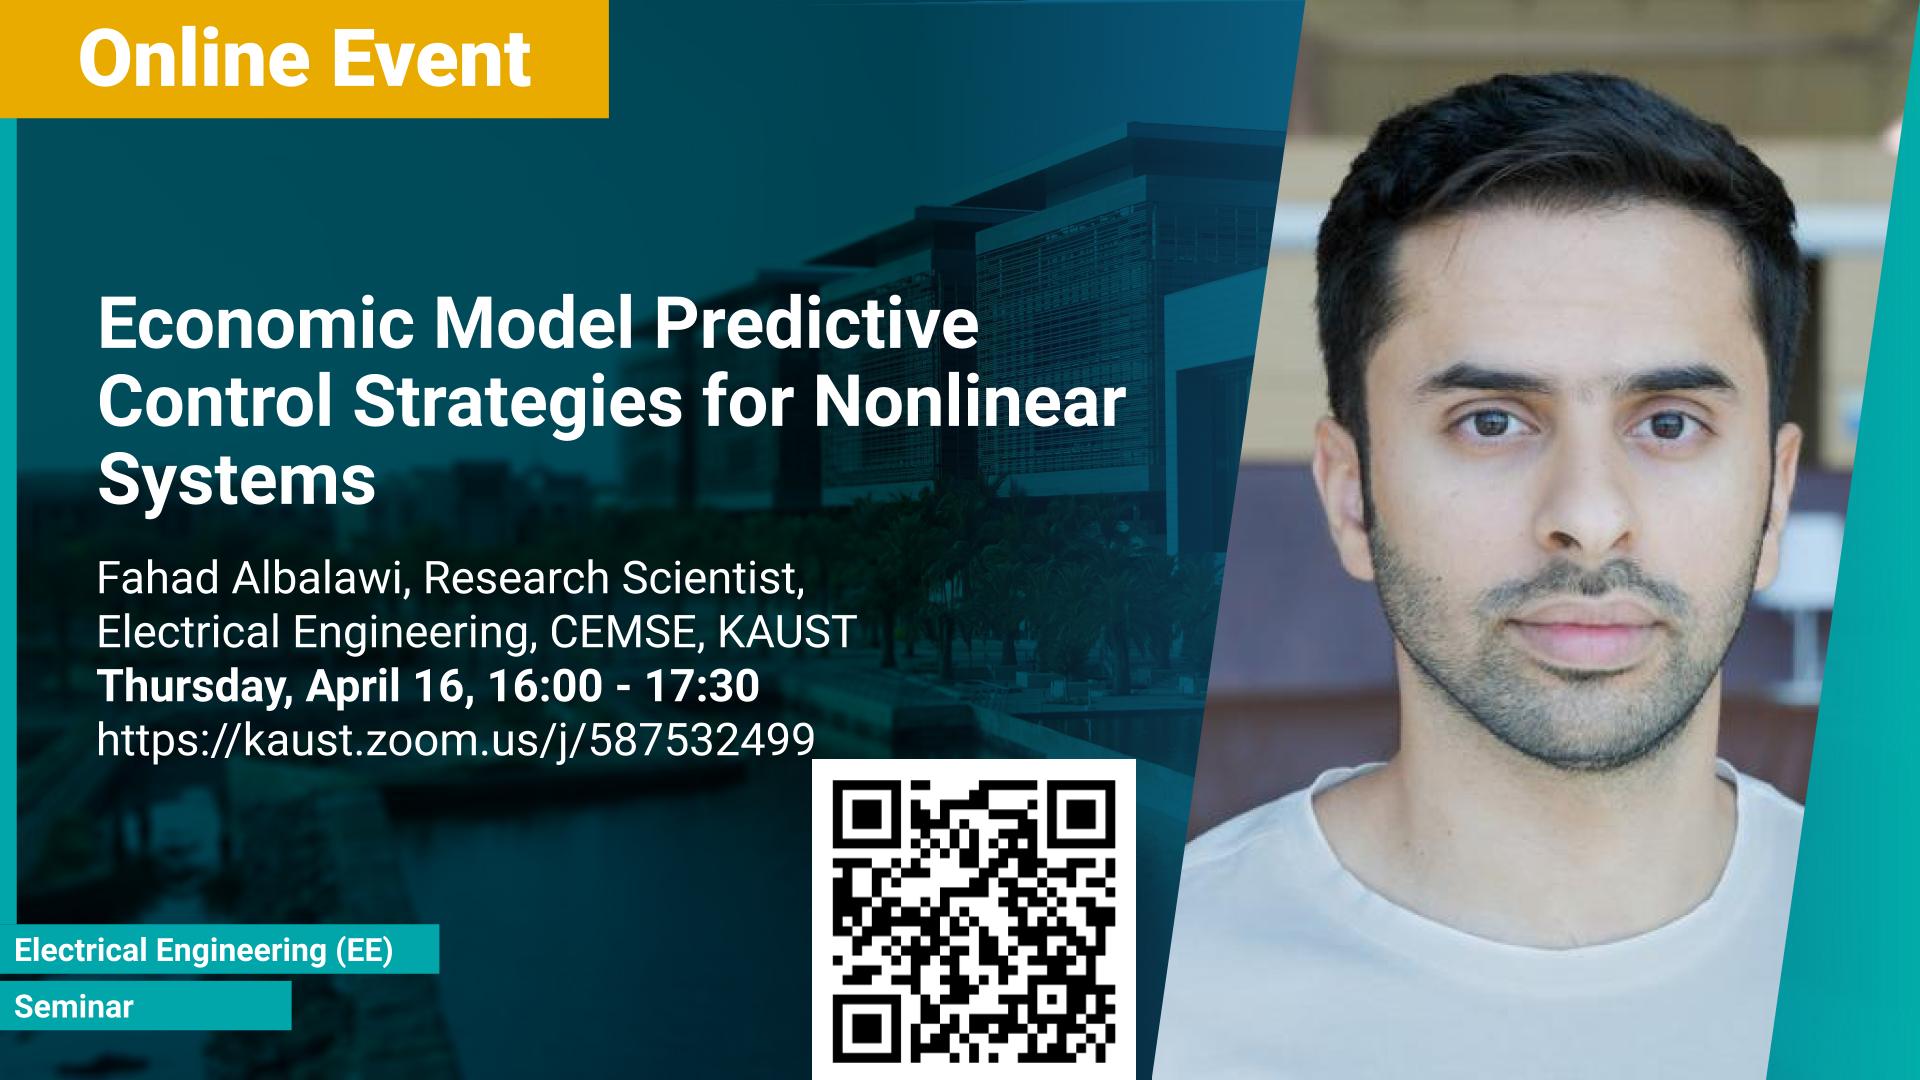 KAUST CEMSE EE Seminar Fahad Albalawi Economic Model Predictive Control Strategies for Nonlinear Systems